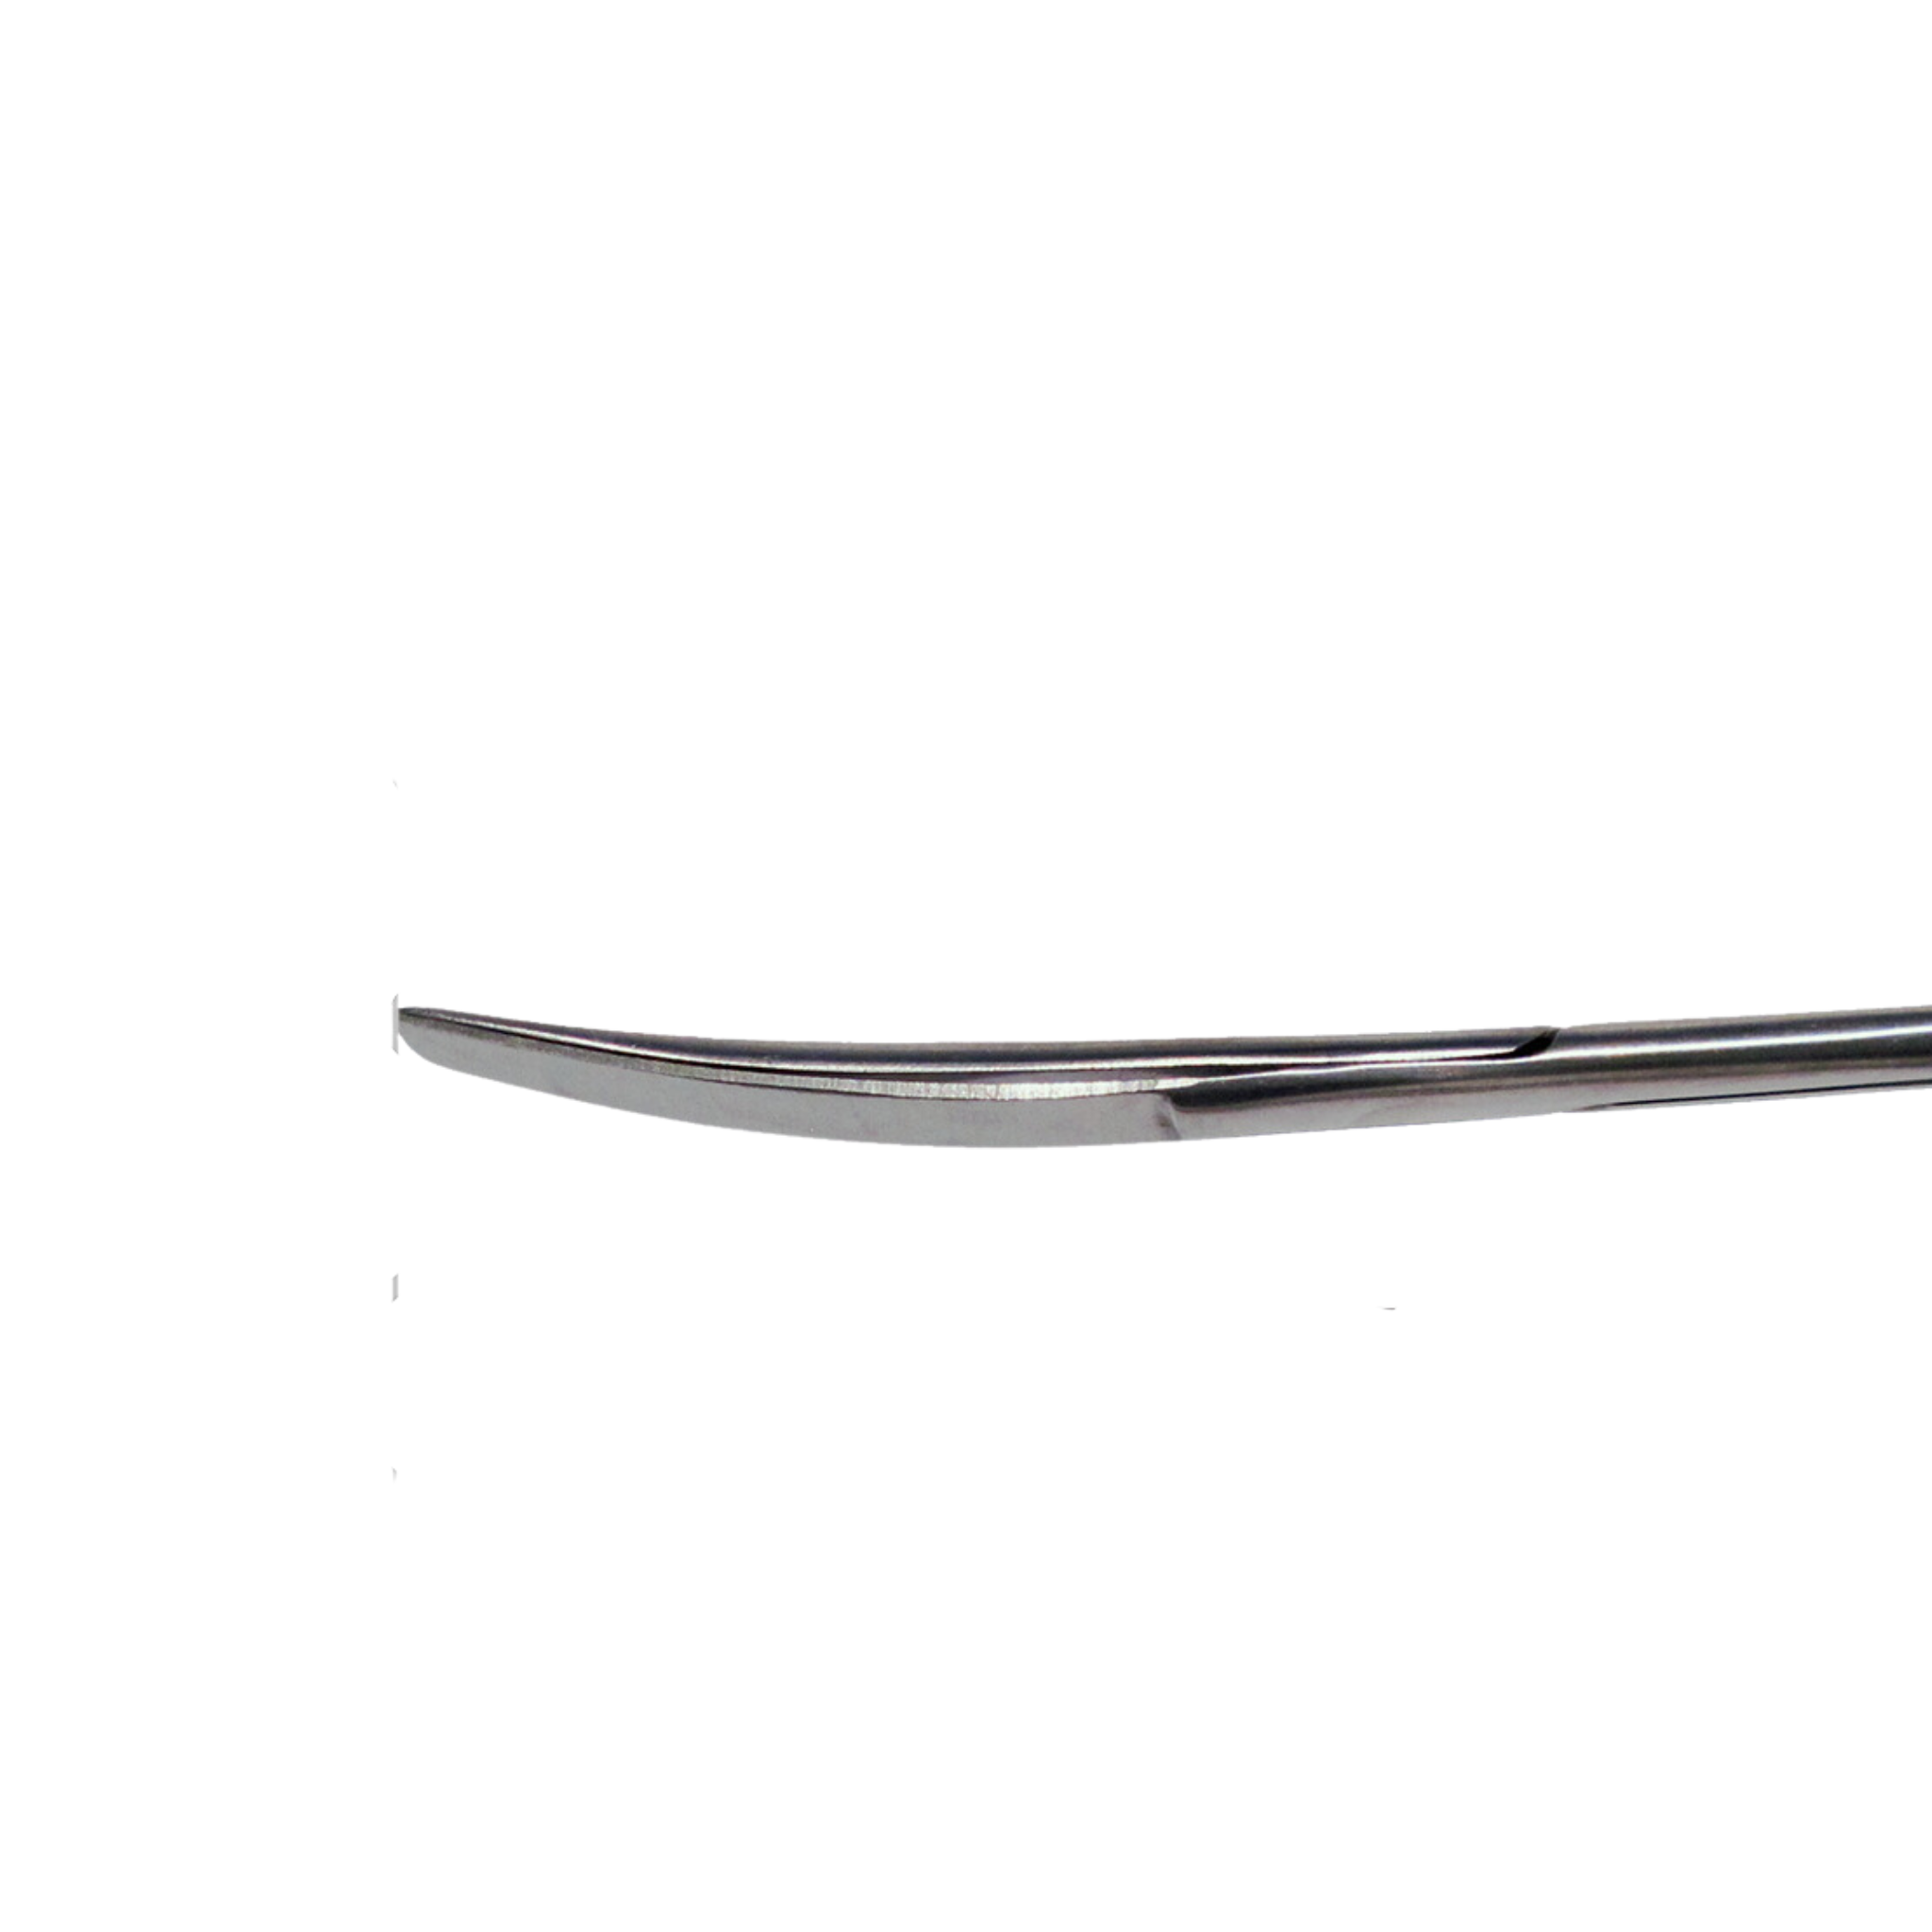 Lavabis surgical scissors curved stainless steel